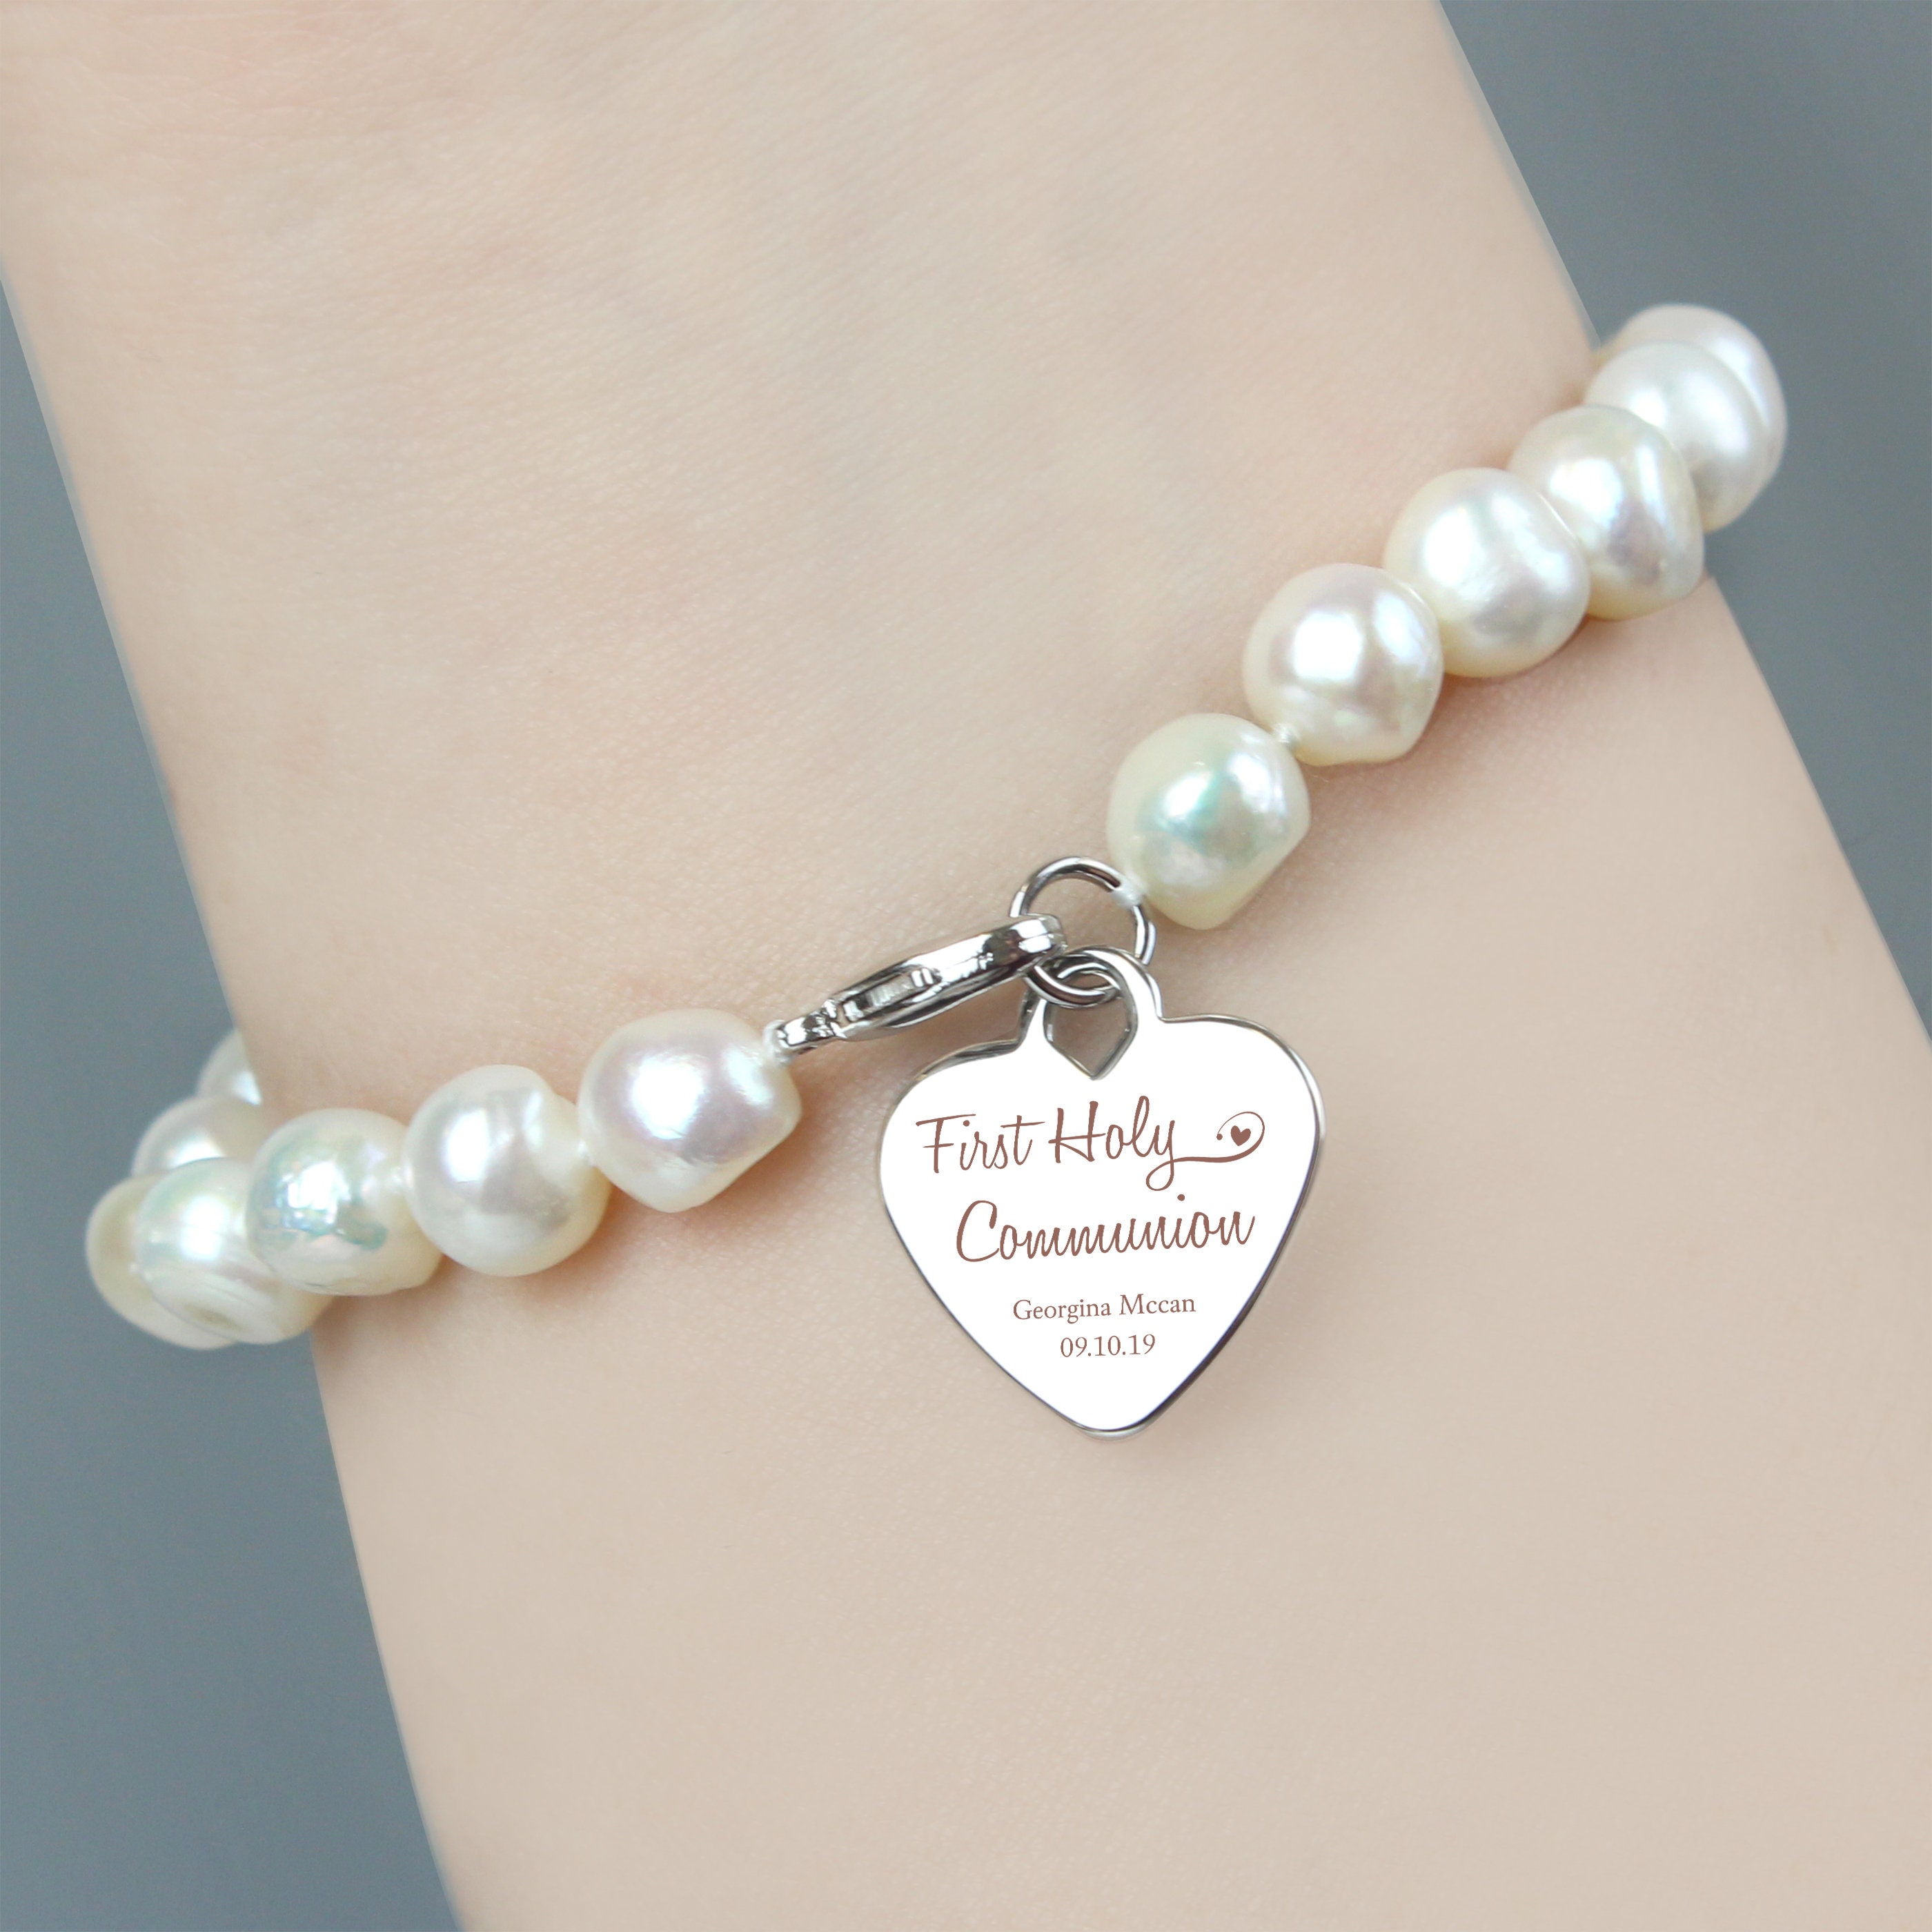 First Holy Communion Bracelet – JNJ Gifts and More